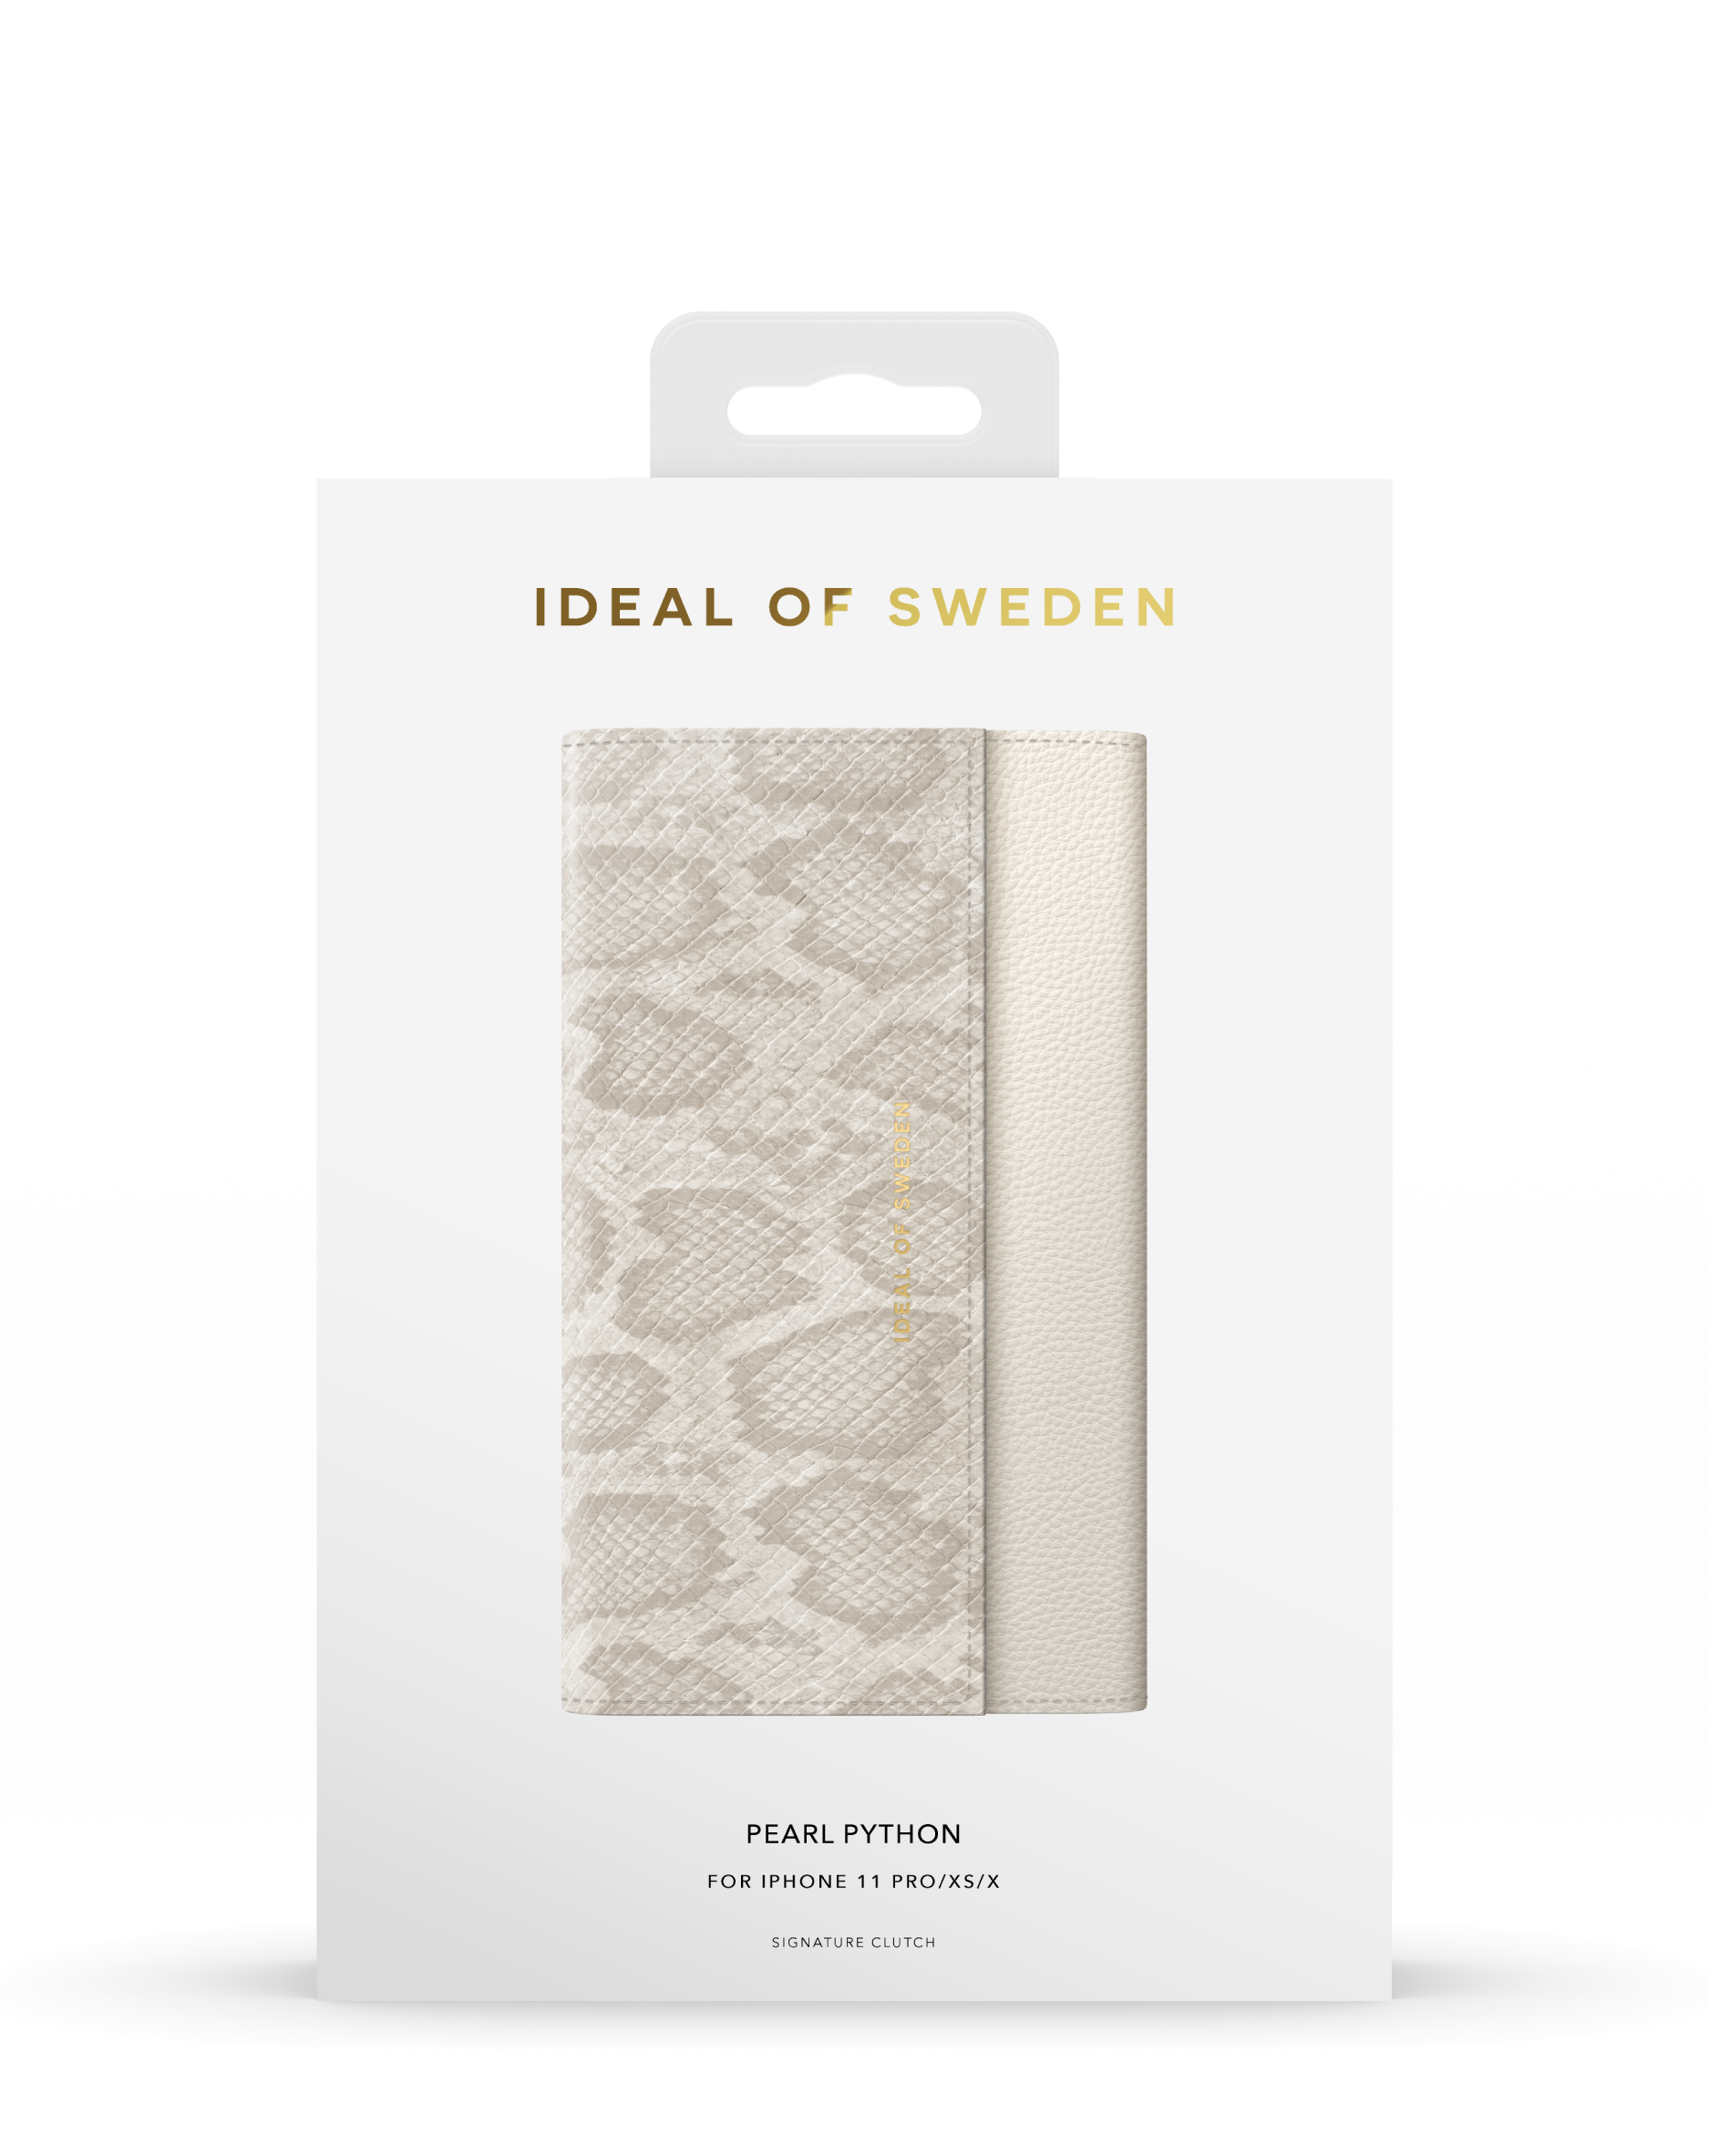 IDSCSS20-I1958-200, Cover, iPhone Python XS, OF Full IDEAL iPhone Apple, SWEDEN Pro, iPhone X, Pearl 11